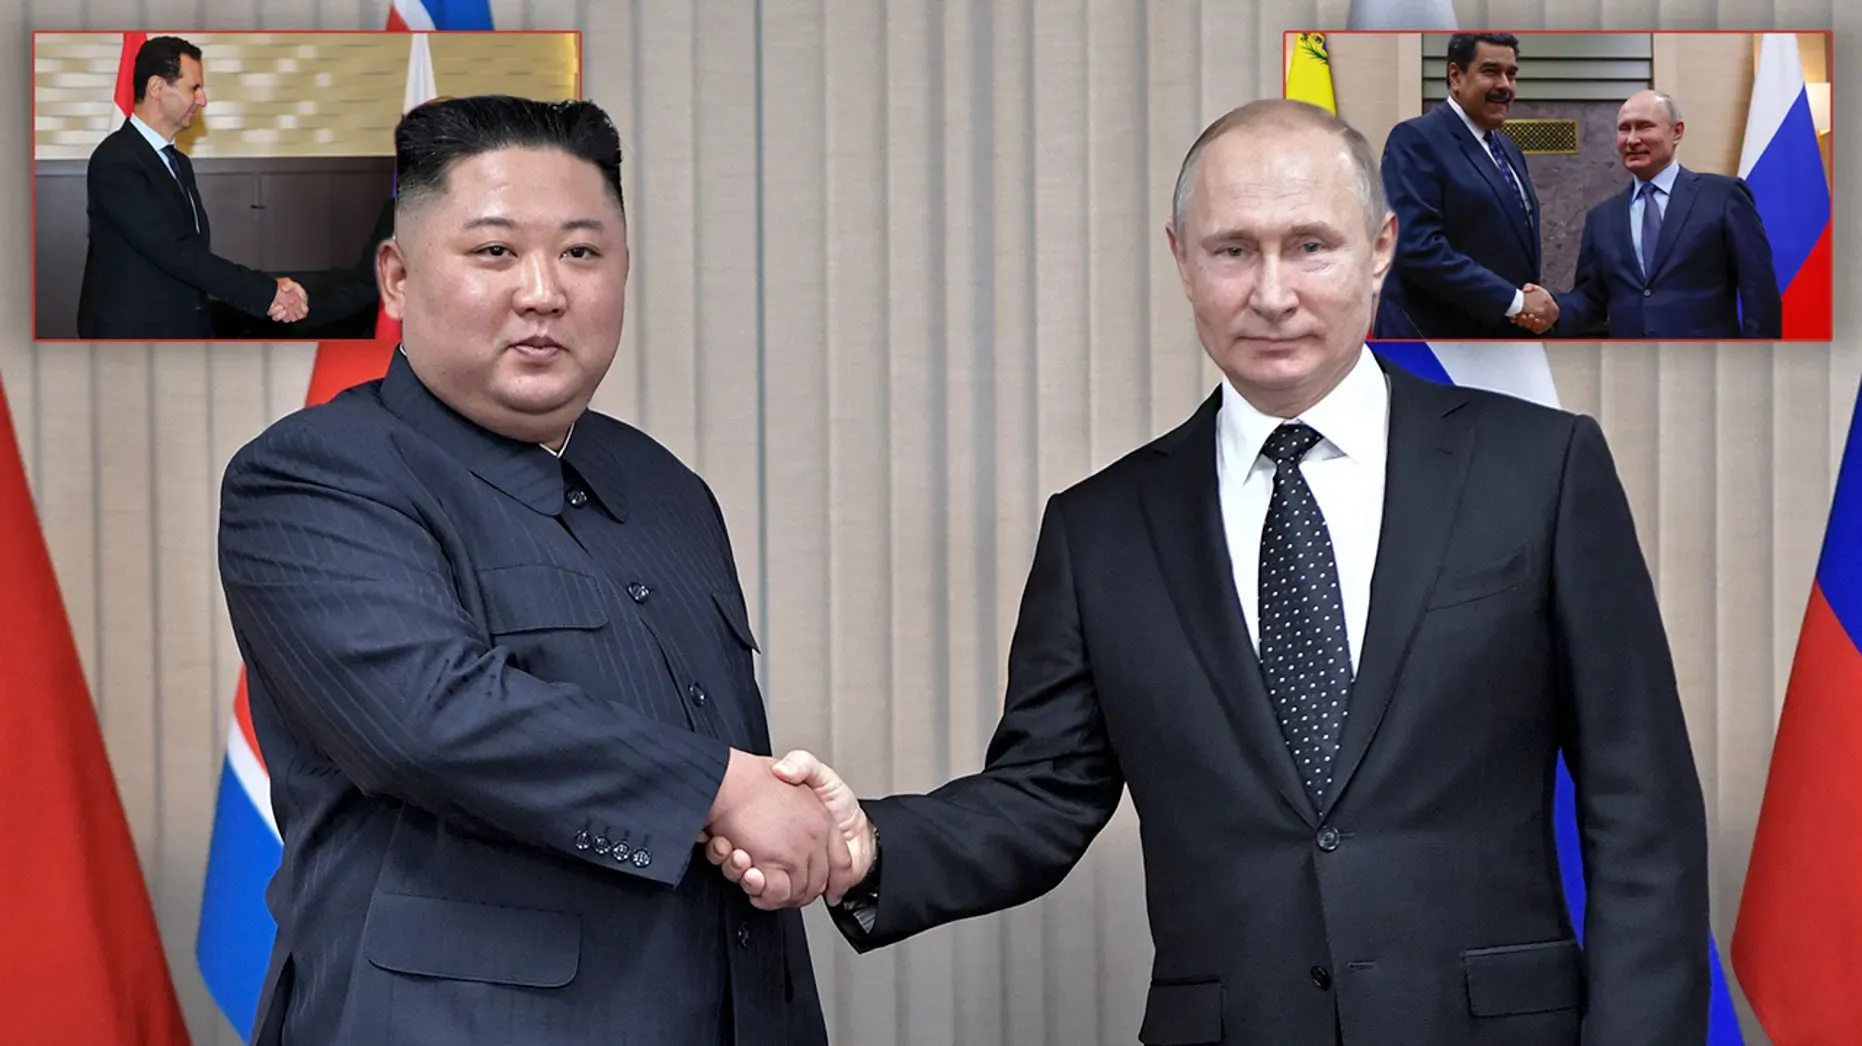 Russia, North Korea Commit to Deepening Relations